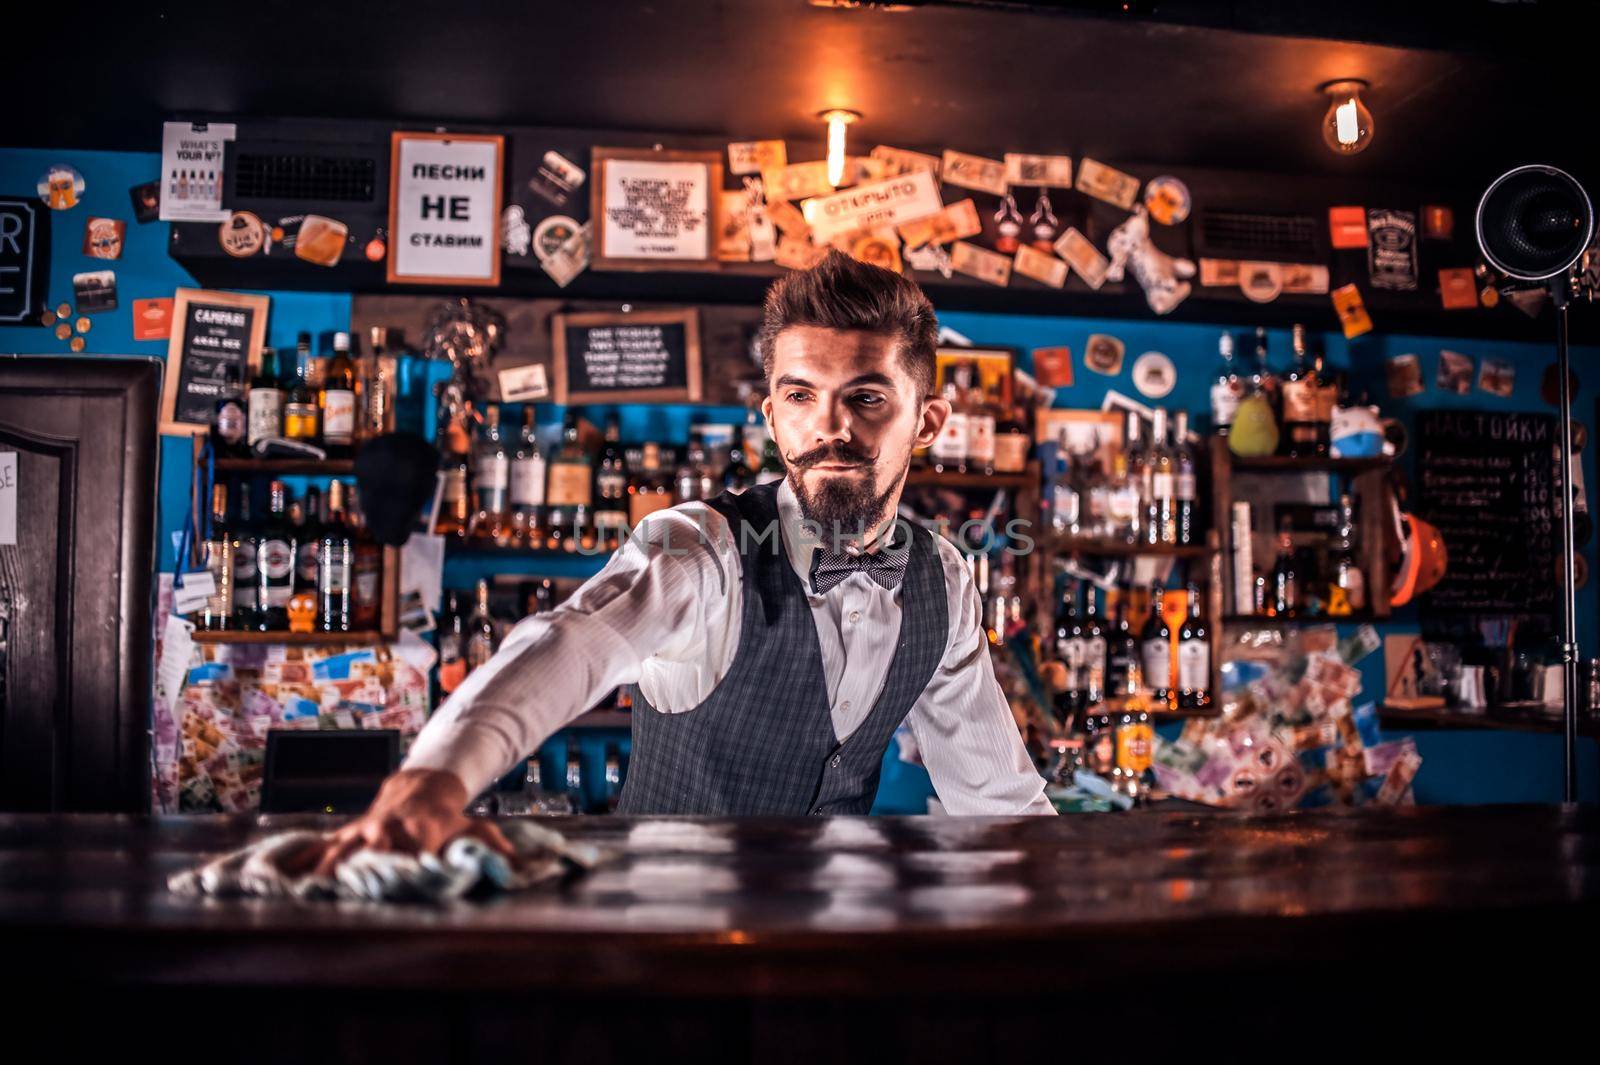 Portrait of bartending adds ingredients to a cocktail while standing near the bar counter in bar by Proff